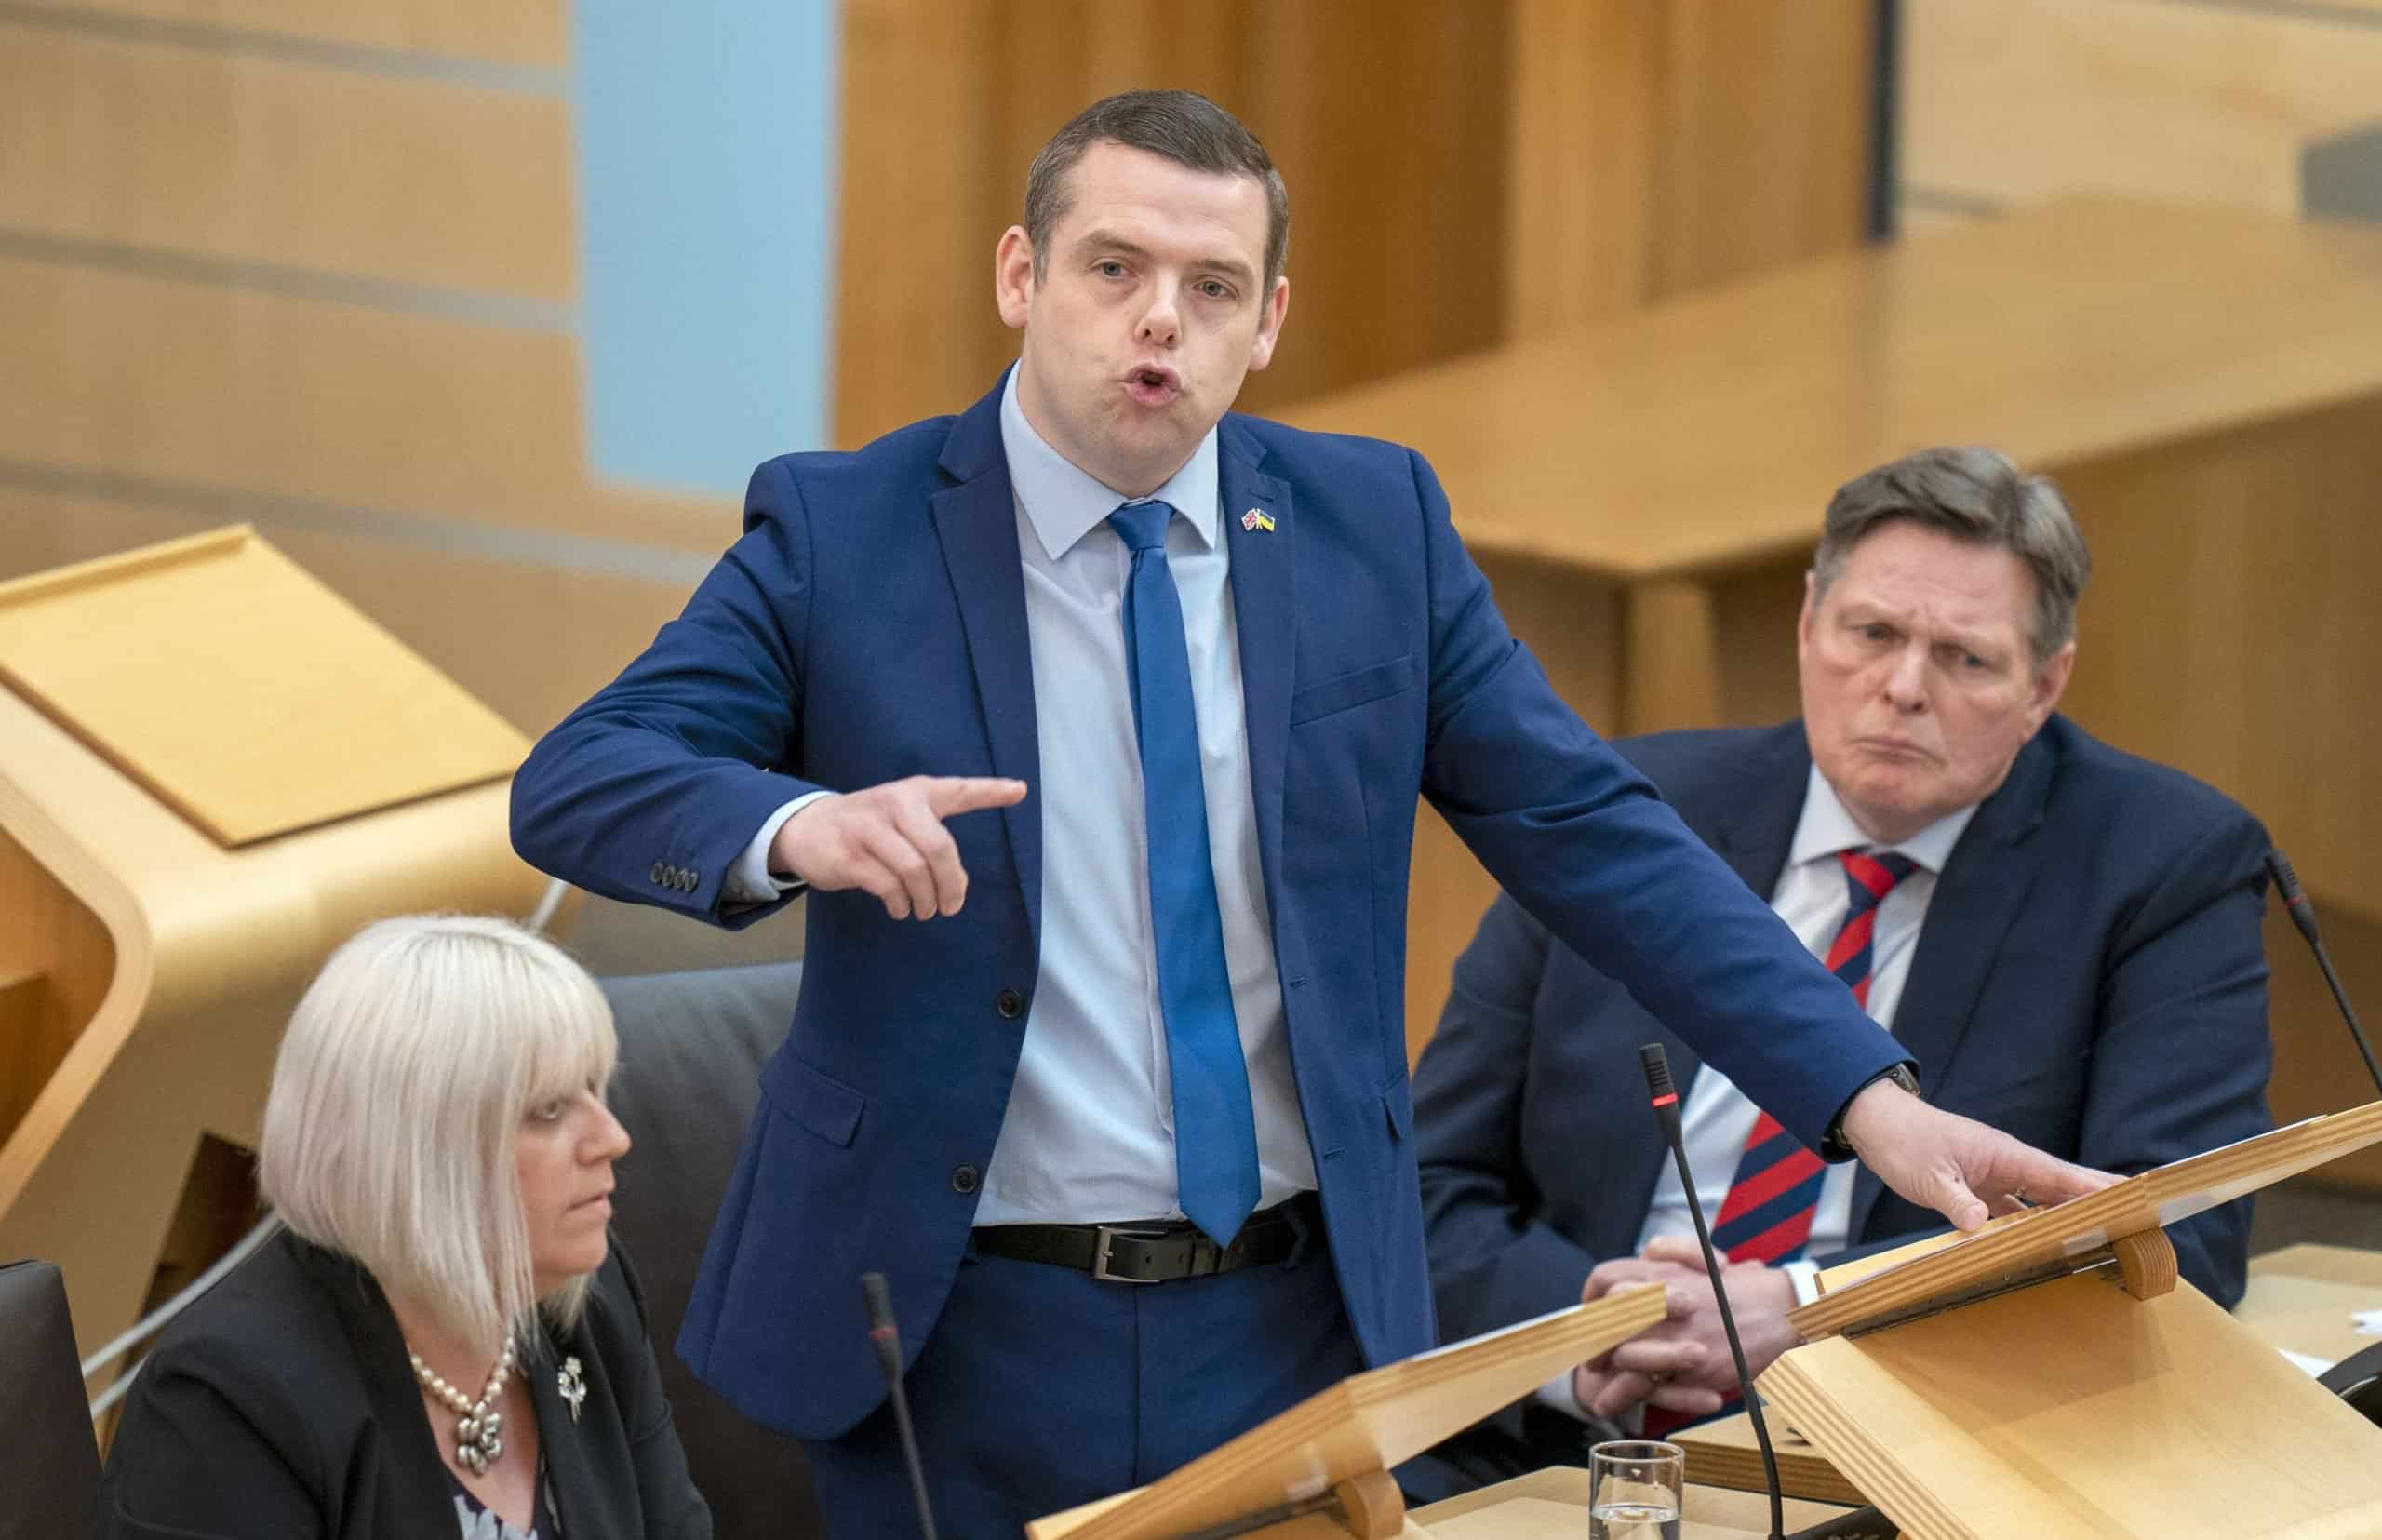 Douglas Ross: I would sack frontbencher if they sent Williamson texts